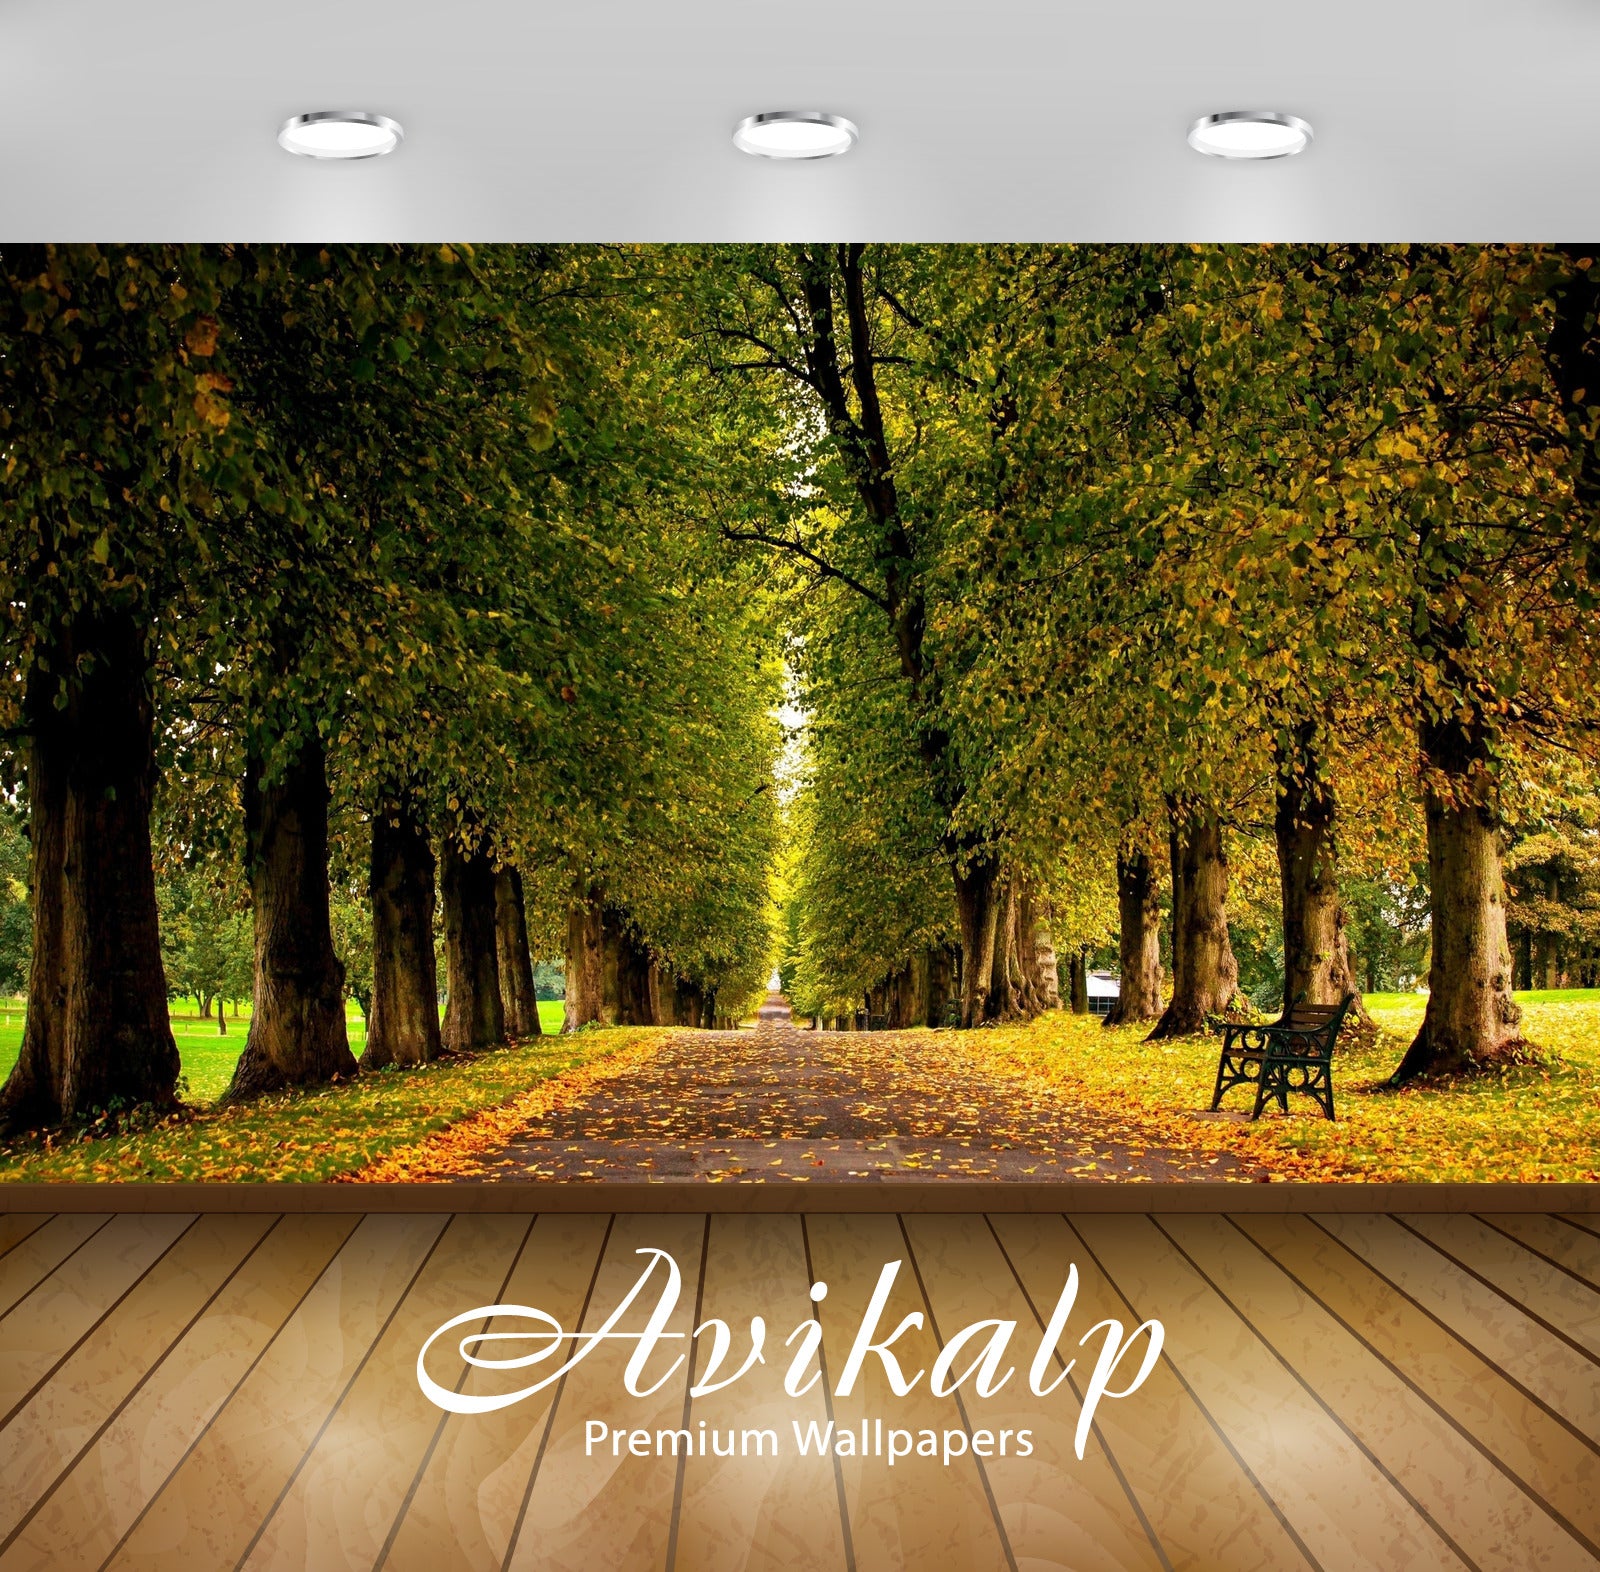 Avikalp Exclusive Awi5151 Autumn Leaves On The Park Path Nature Full HD Wallpapers for Living room,